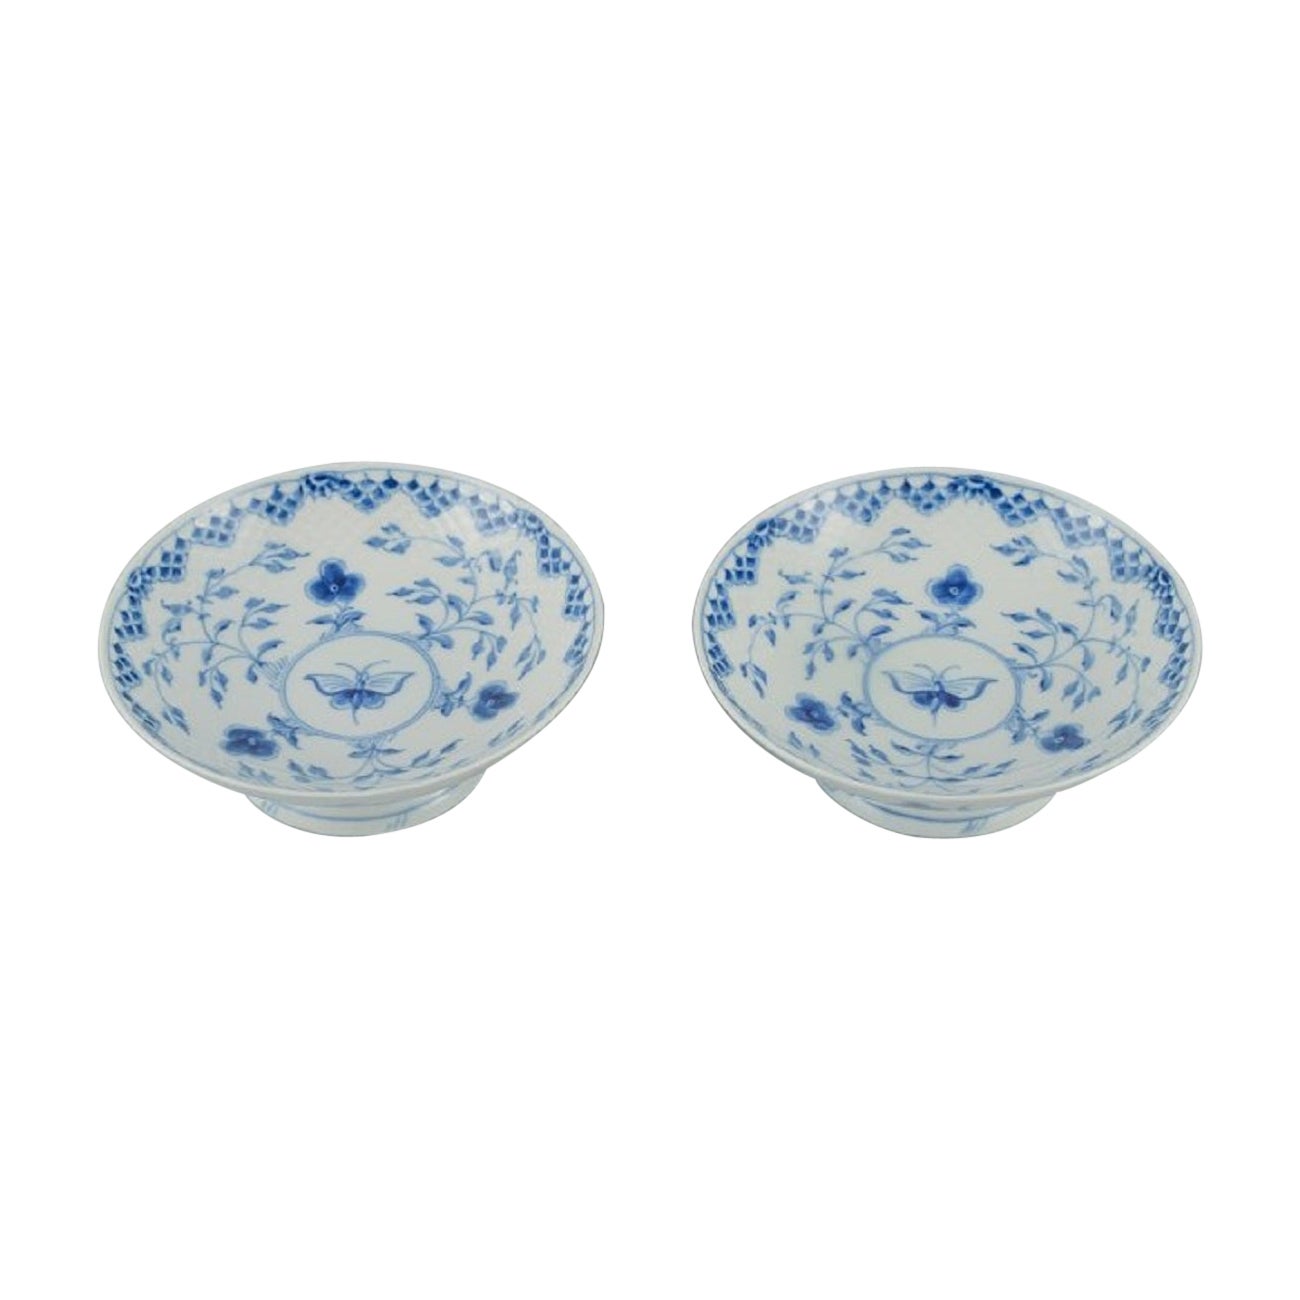 Bing & Grondahl, Kipling, Two Porcelain Bowls Model Number: 427. in Perfect Cond For Sale